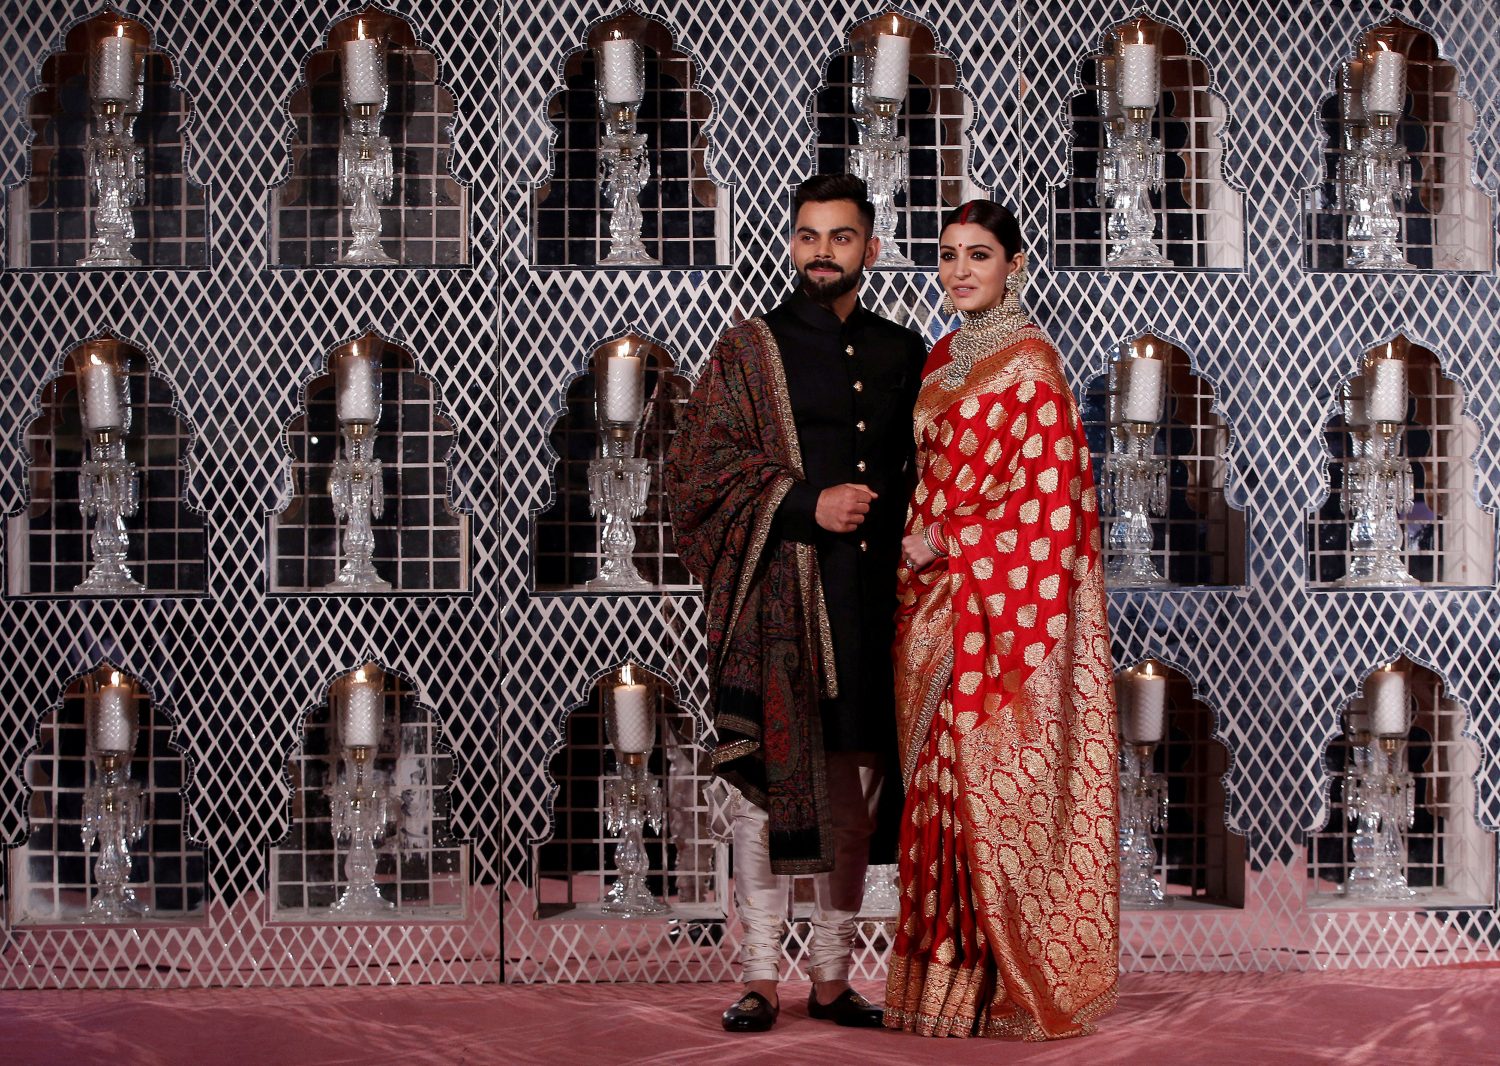 India’s cricket team captain Virat Kohli (L) and his wife, Bollywood actress Anushka Sharma, pose during a photo opportunity at their wedding reception in New Delhi, India December 21, 2017. REUTERS/ Adnan Abidi TPX IMAGES OF THE DAY